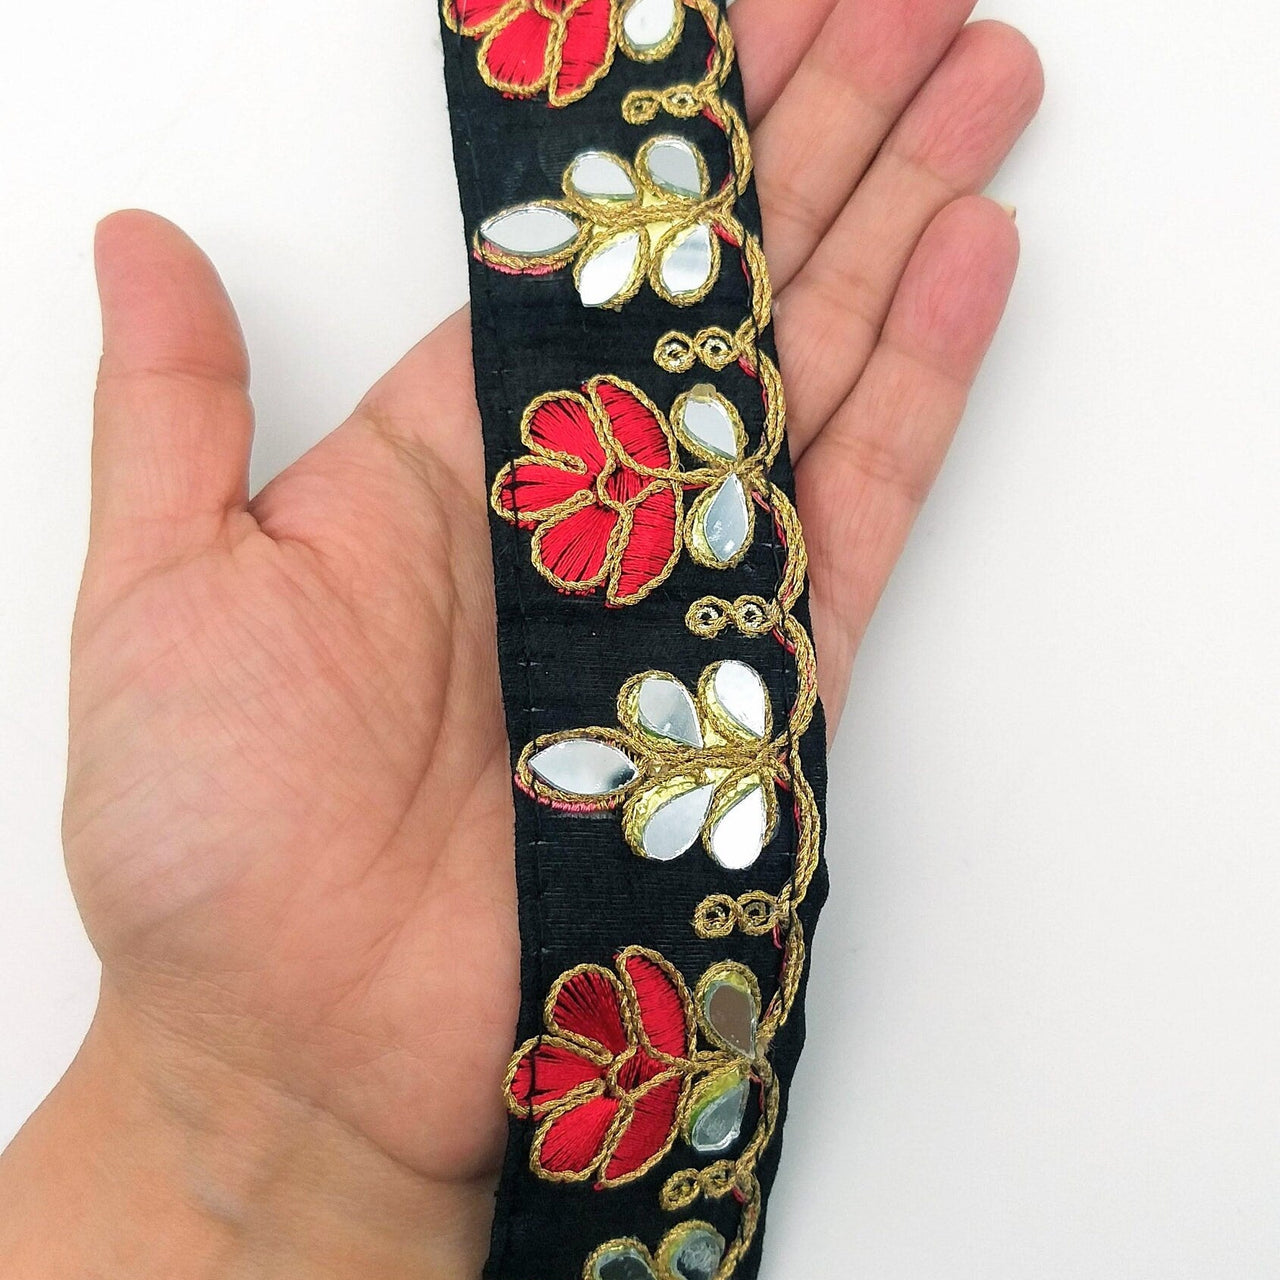 Black Silk Trim With Mirrors Embellishments and Gold Embroidery, Approx. 38mm Wide, Decorative Trim Costume Trim Floral Trim By Yard